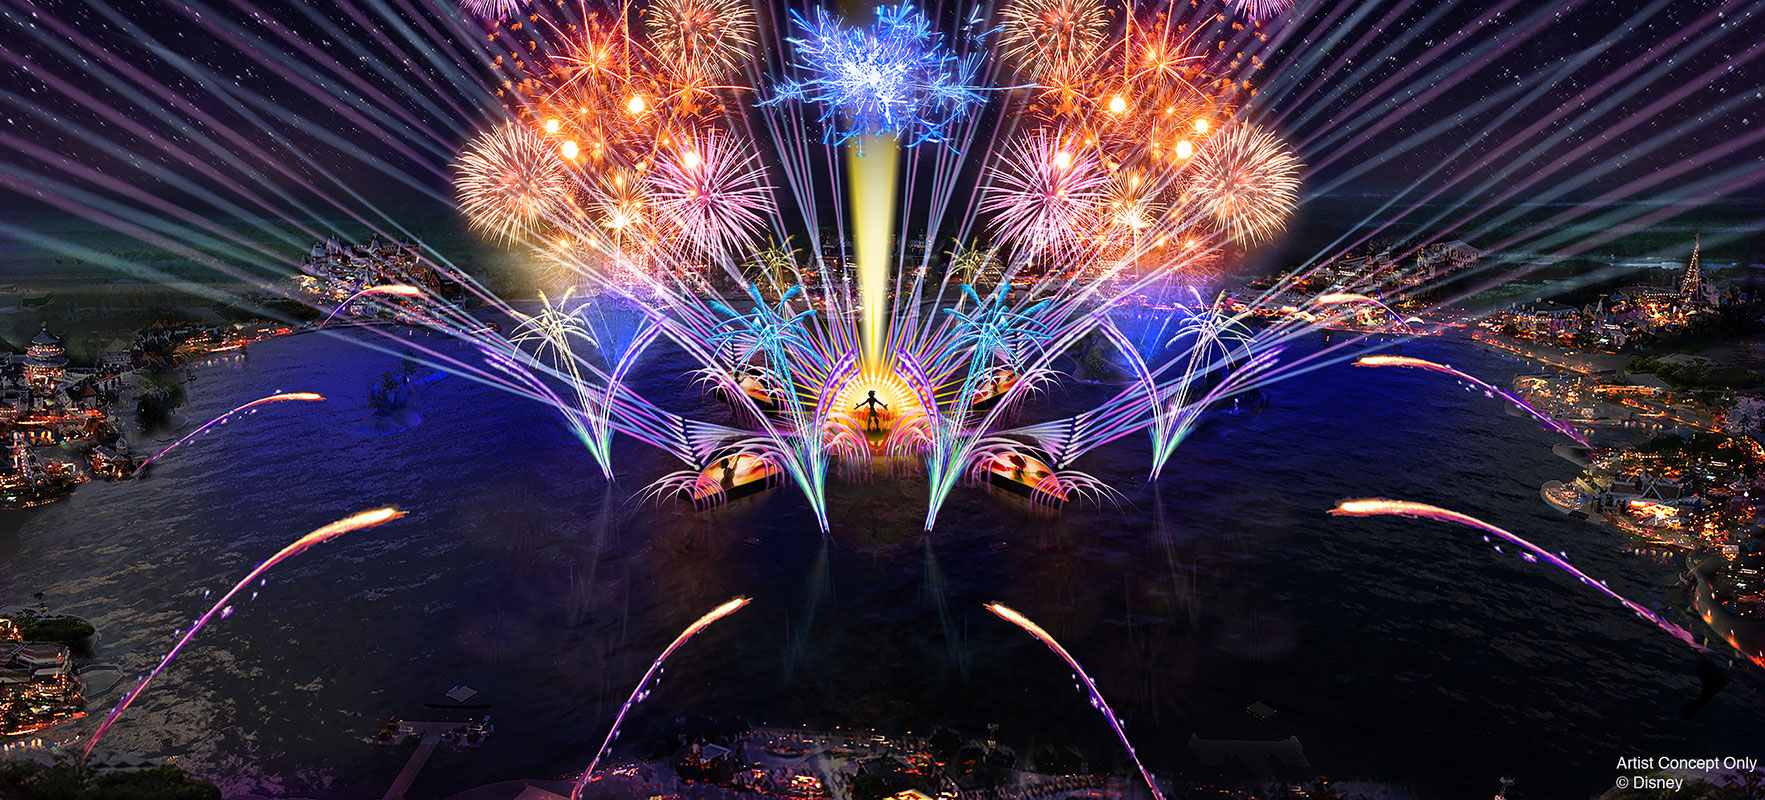 IMAGE: An artist rendering of the new fireworks show, HarmoniUS. Image courtesy of Disney.